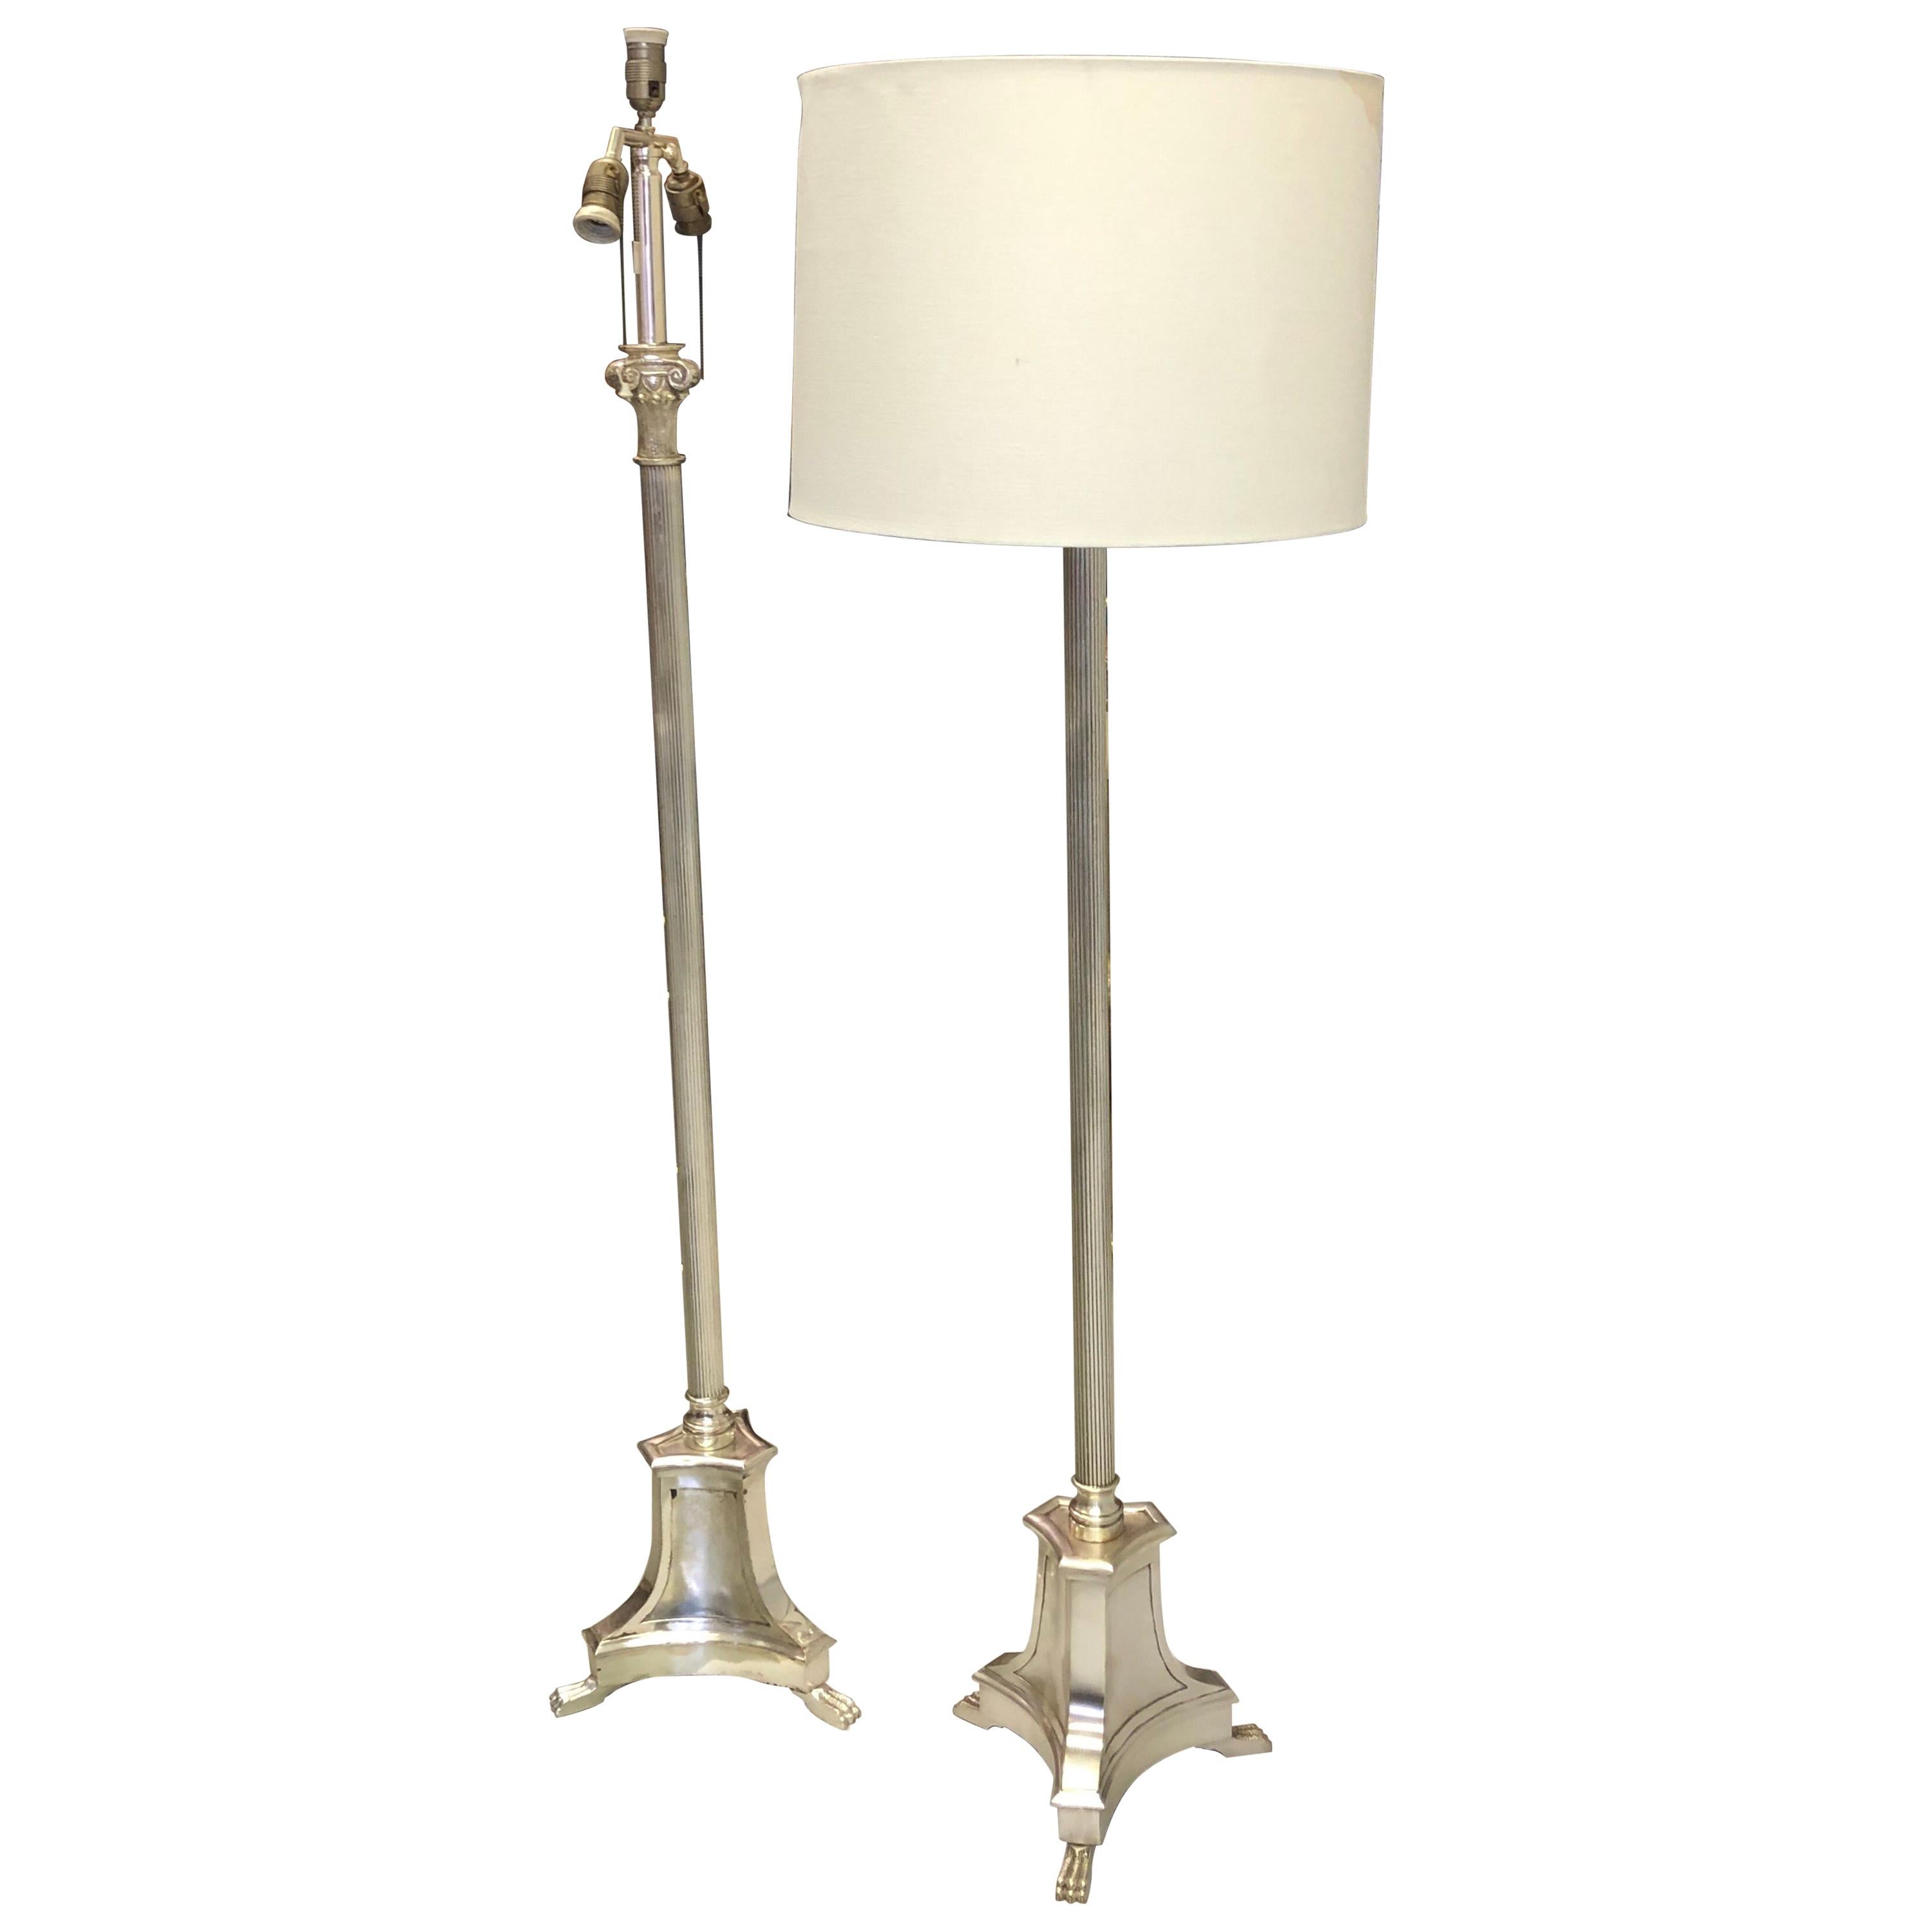 Pair of Modern Neoclassical Silver Floor Lamps Attributed to Andre Arbus, 1935 For Sale